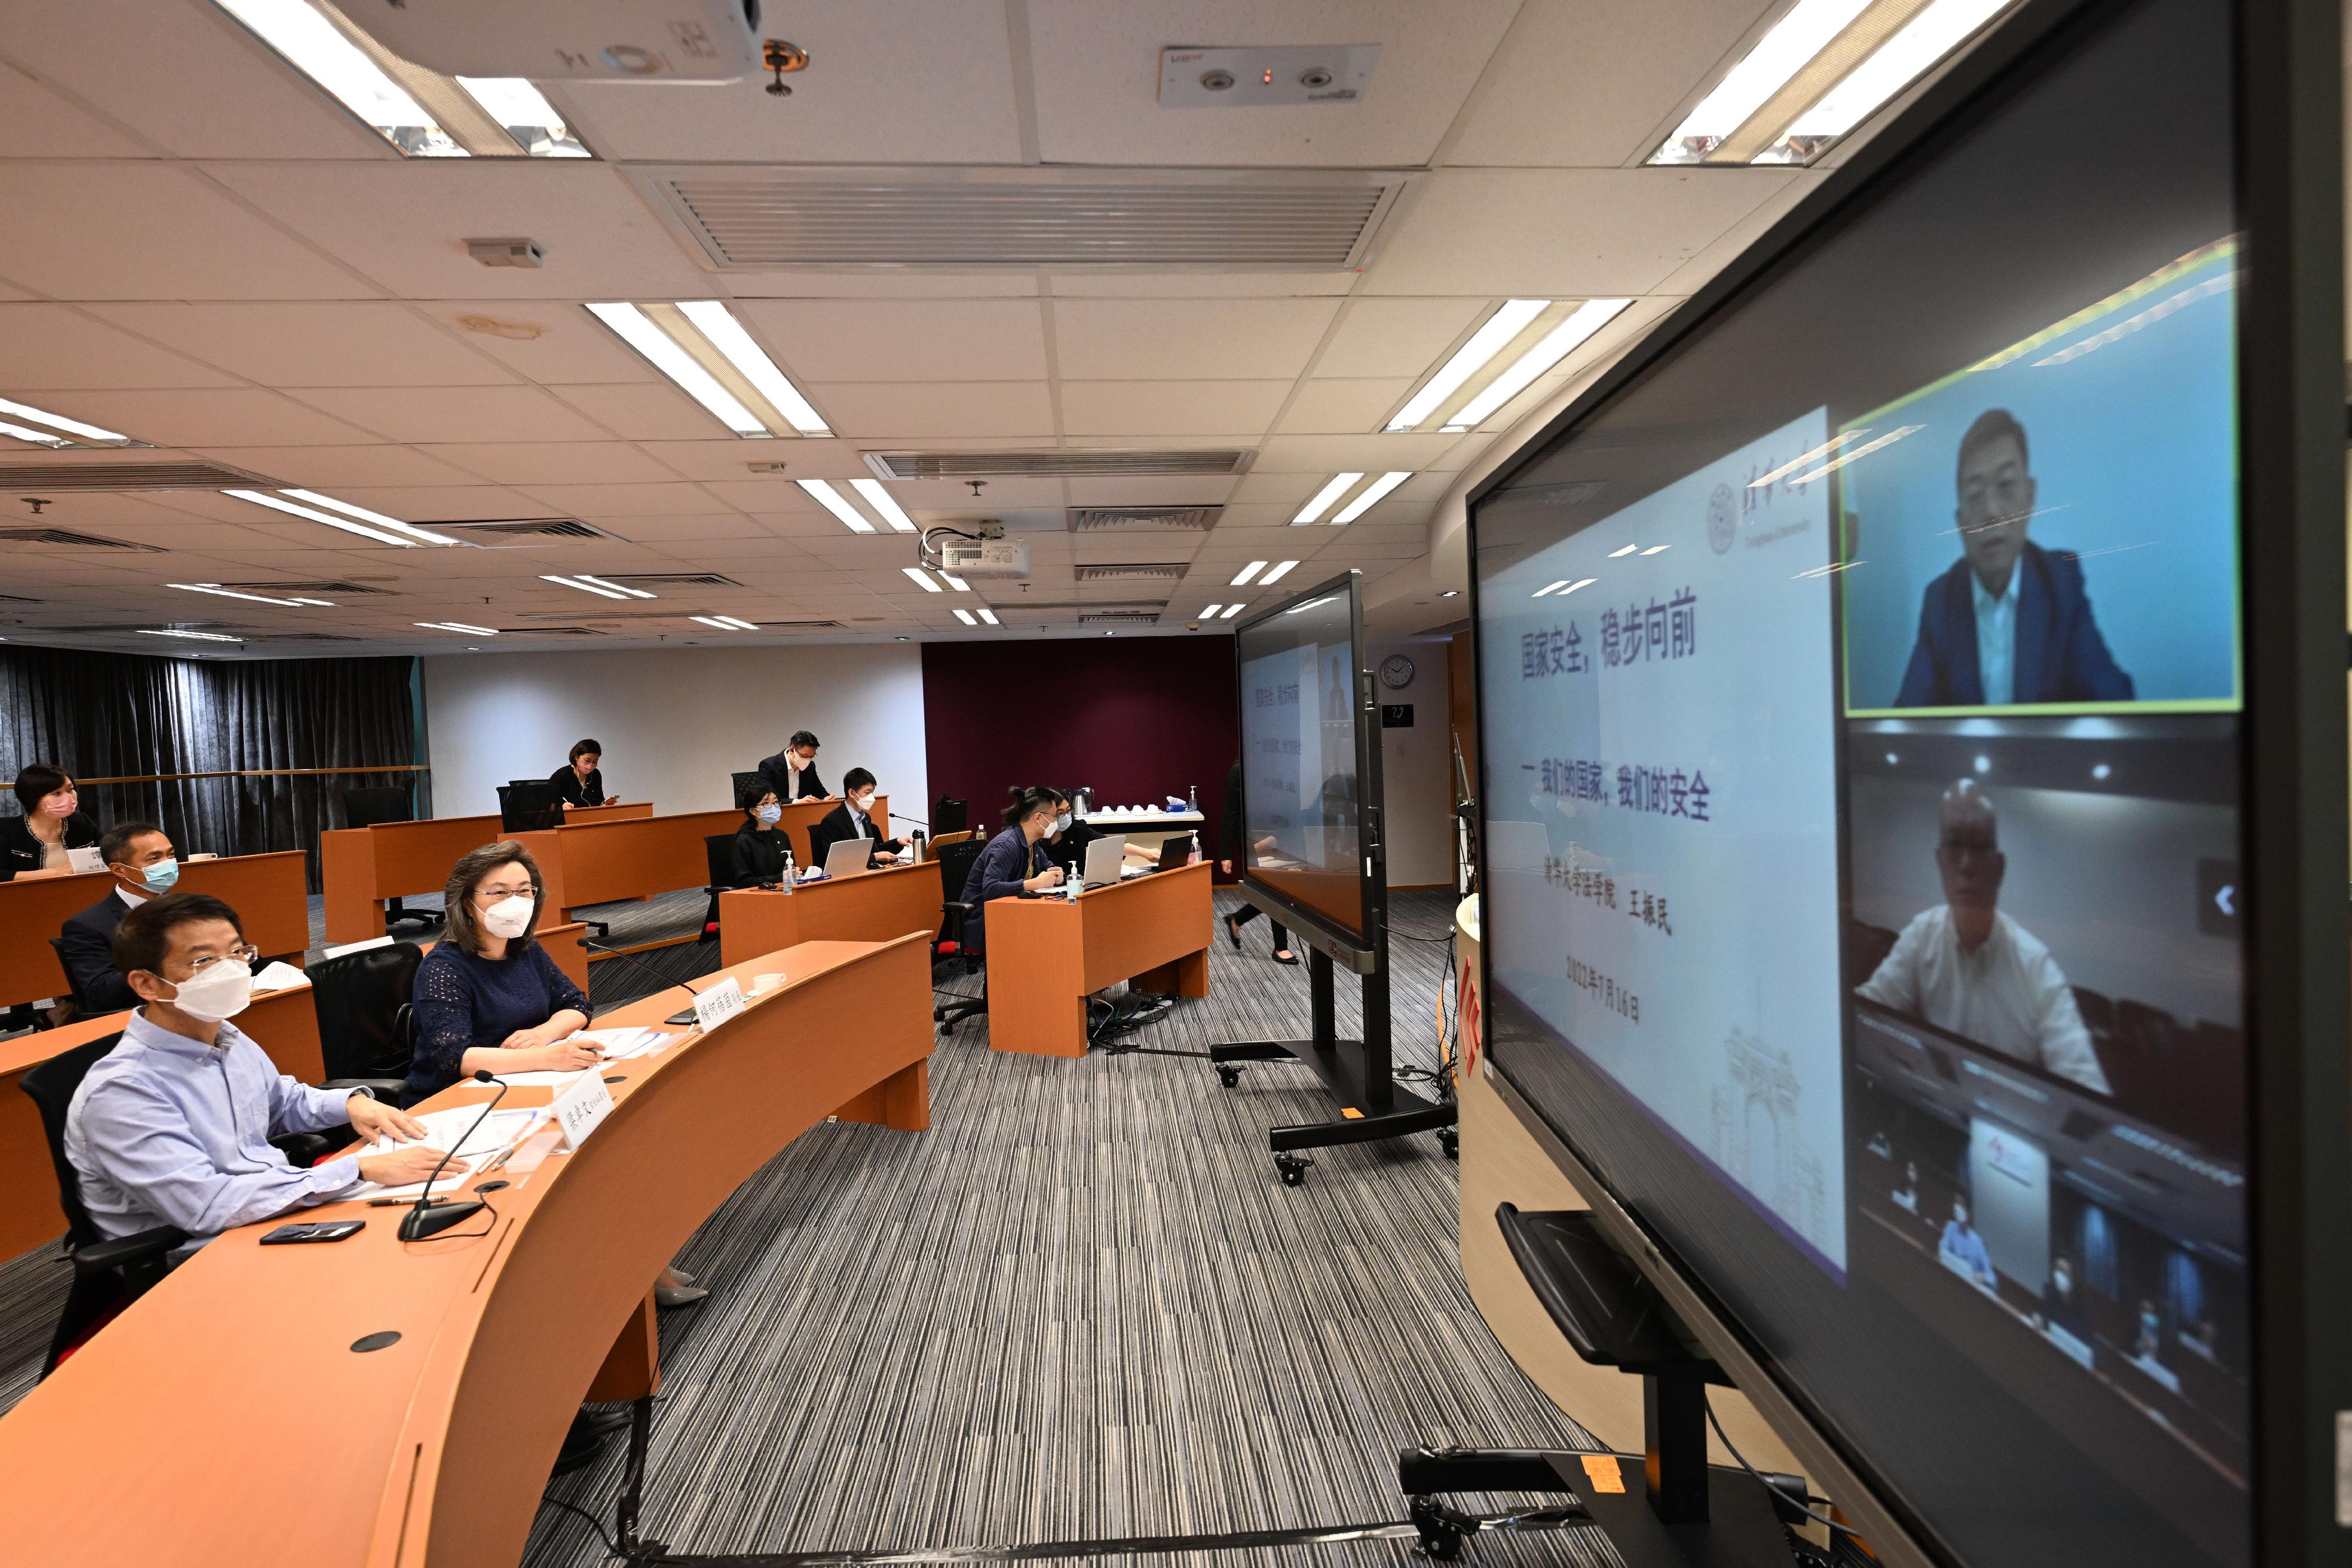 The Civil Service College has launched the "25th Anniversary of the Establishment of the HKSAR: Our Way Forward" seminar series to better equip civil servants to complement the country's and Hong Kong's development in their work by exploring national development strategies through different lenses. The second seminar of the series, delivered via video conferencing today (July 16) by Professor Wang Zhenmin of the School of Law of Tsinghua University, covers the holistic view of national security as well as issues relating to safeguarding national security.
